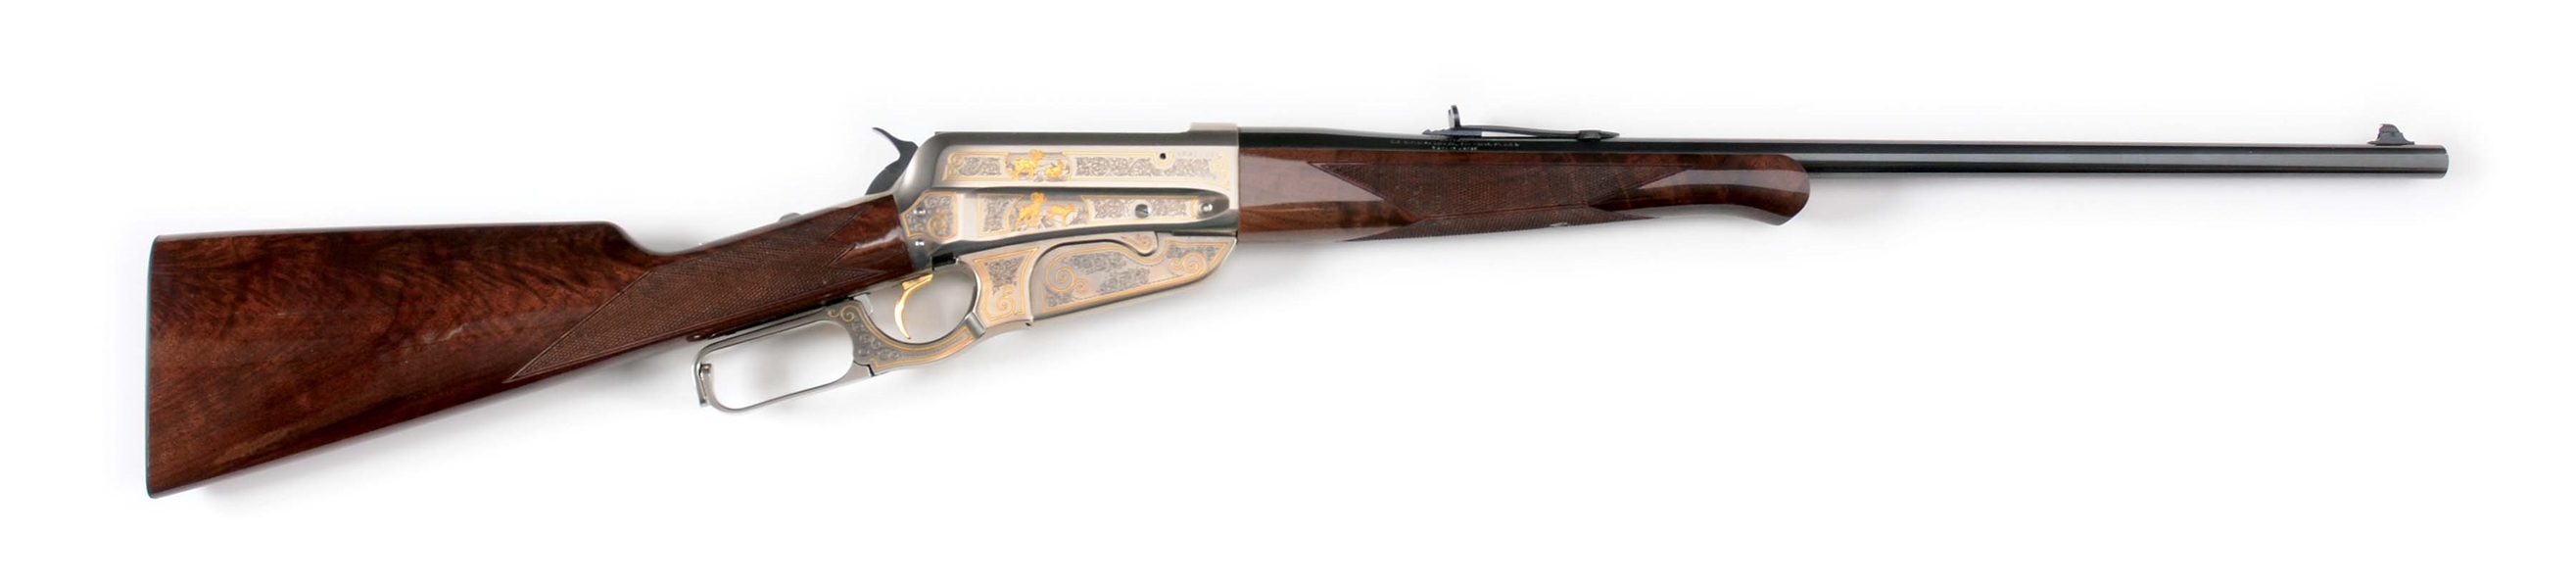 (M) WINCHESTER (JAPAN) DELUXE GRADE MODEL 1895 LEVER ACTION RIFLE.